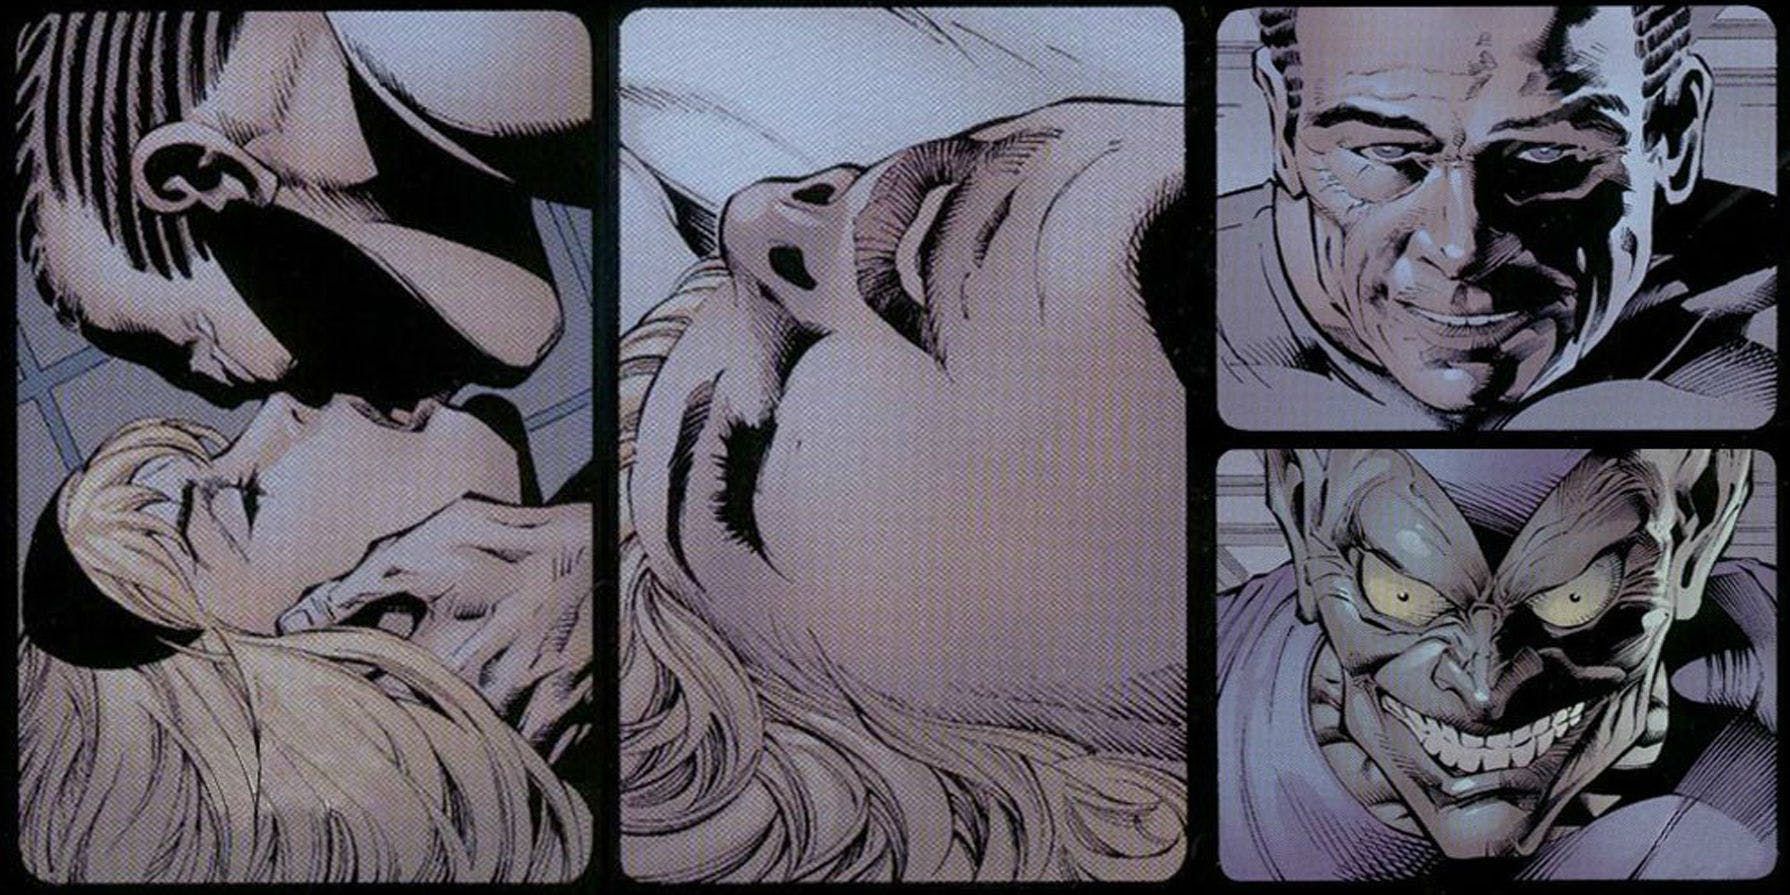 Comic panels of Gwen Stacey romantically involved with Norman Osborn and Green Goblin